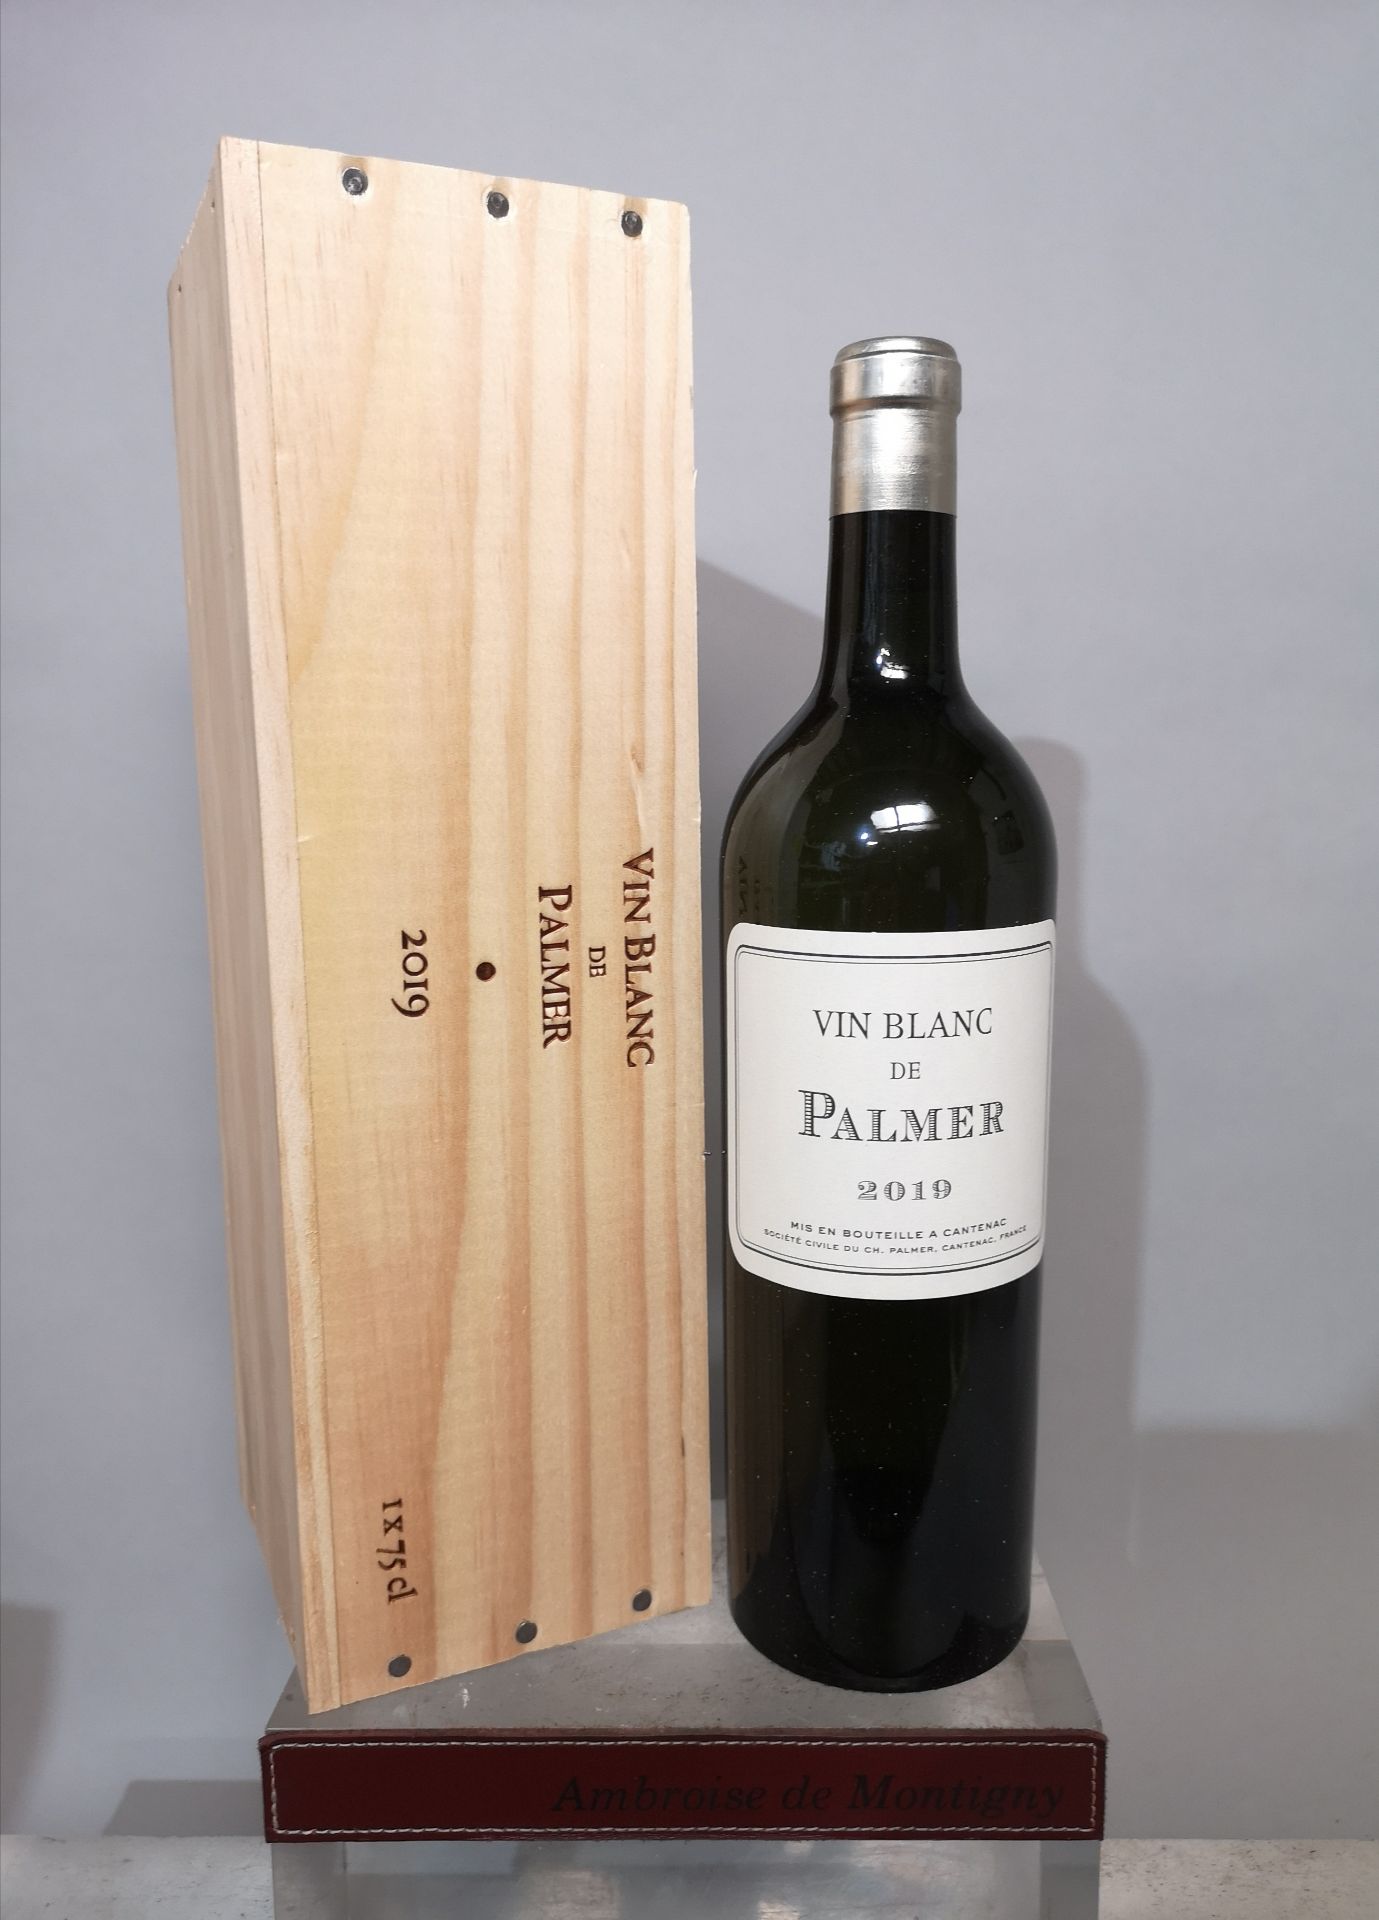 1 Palmer white wine bottle - Margaux 2019.In an individual box.